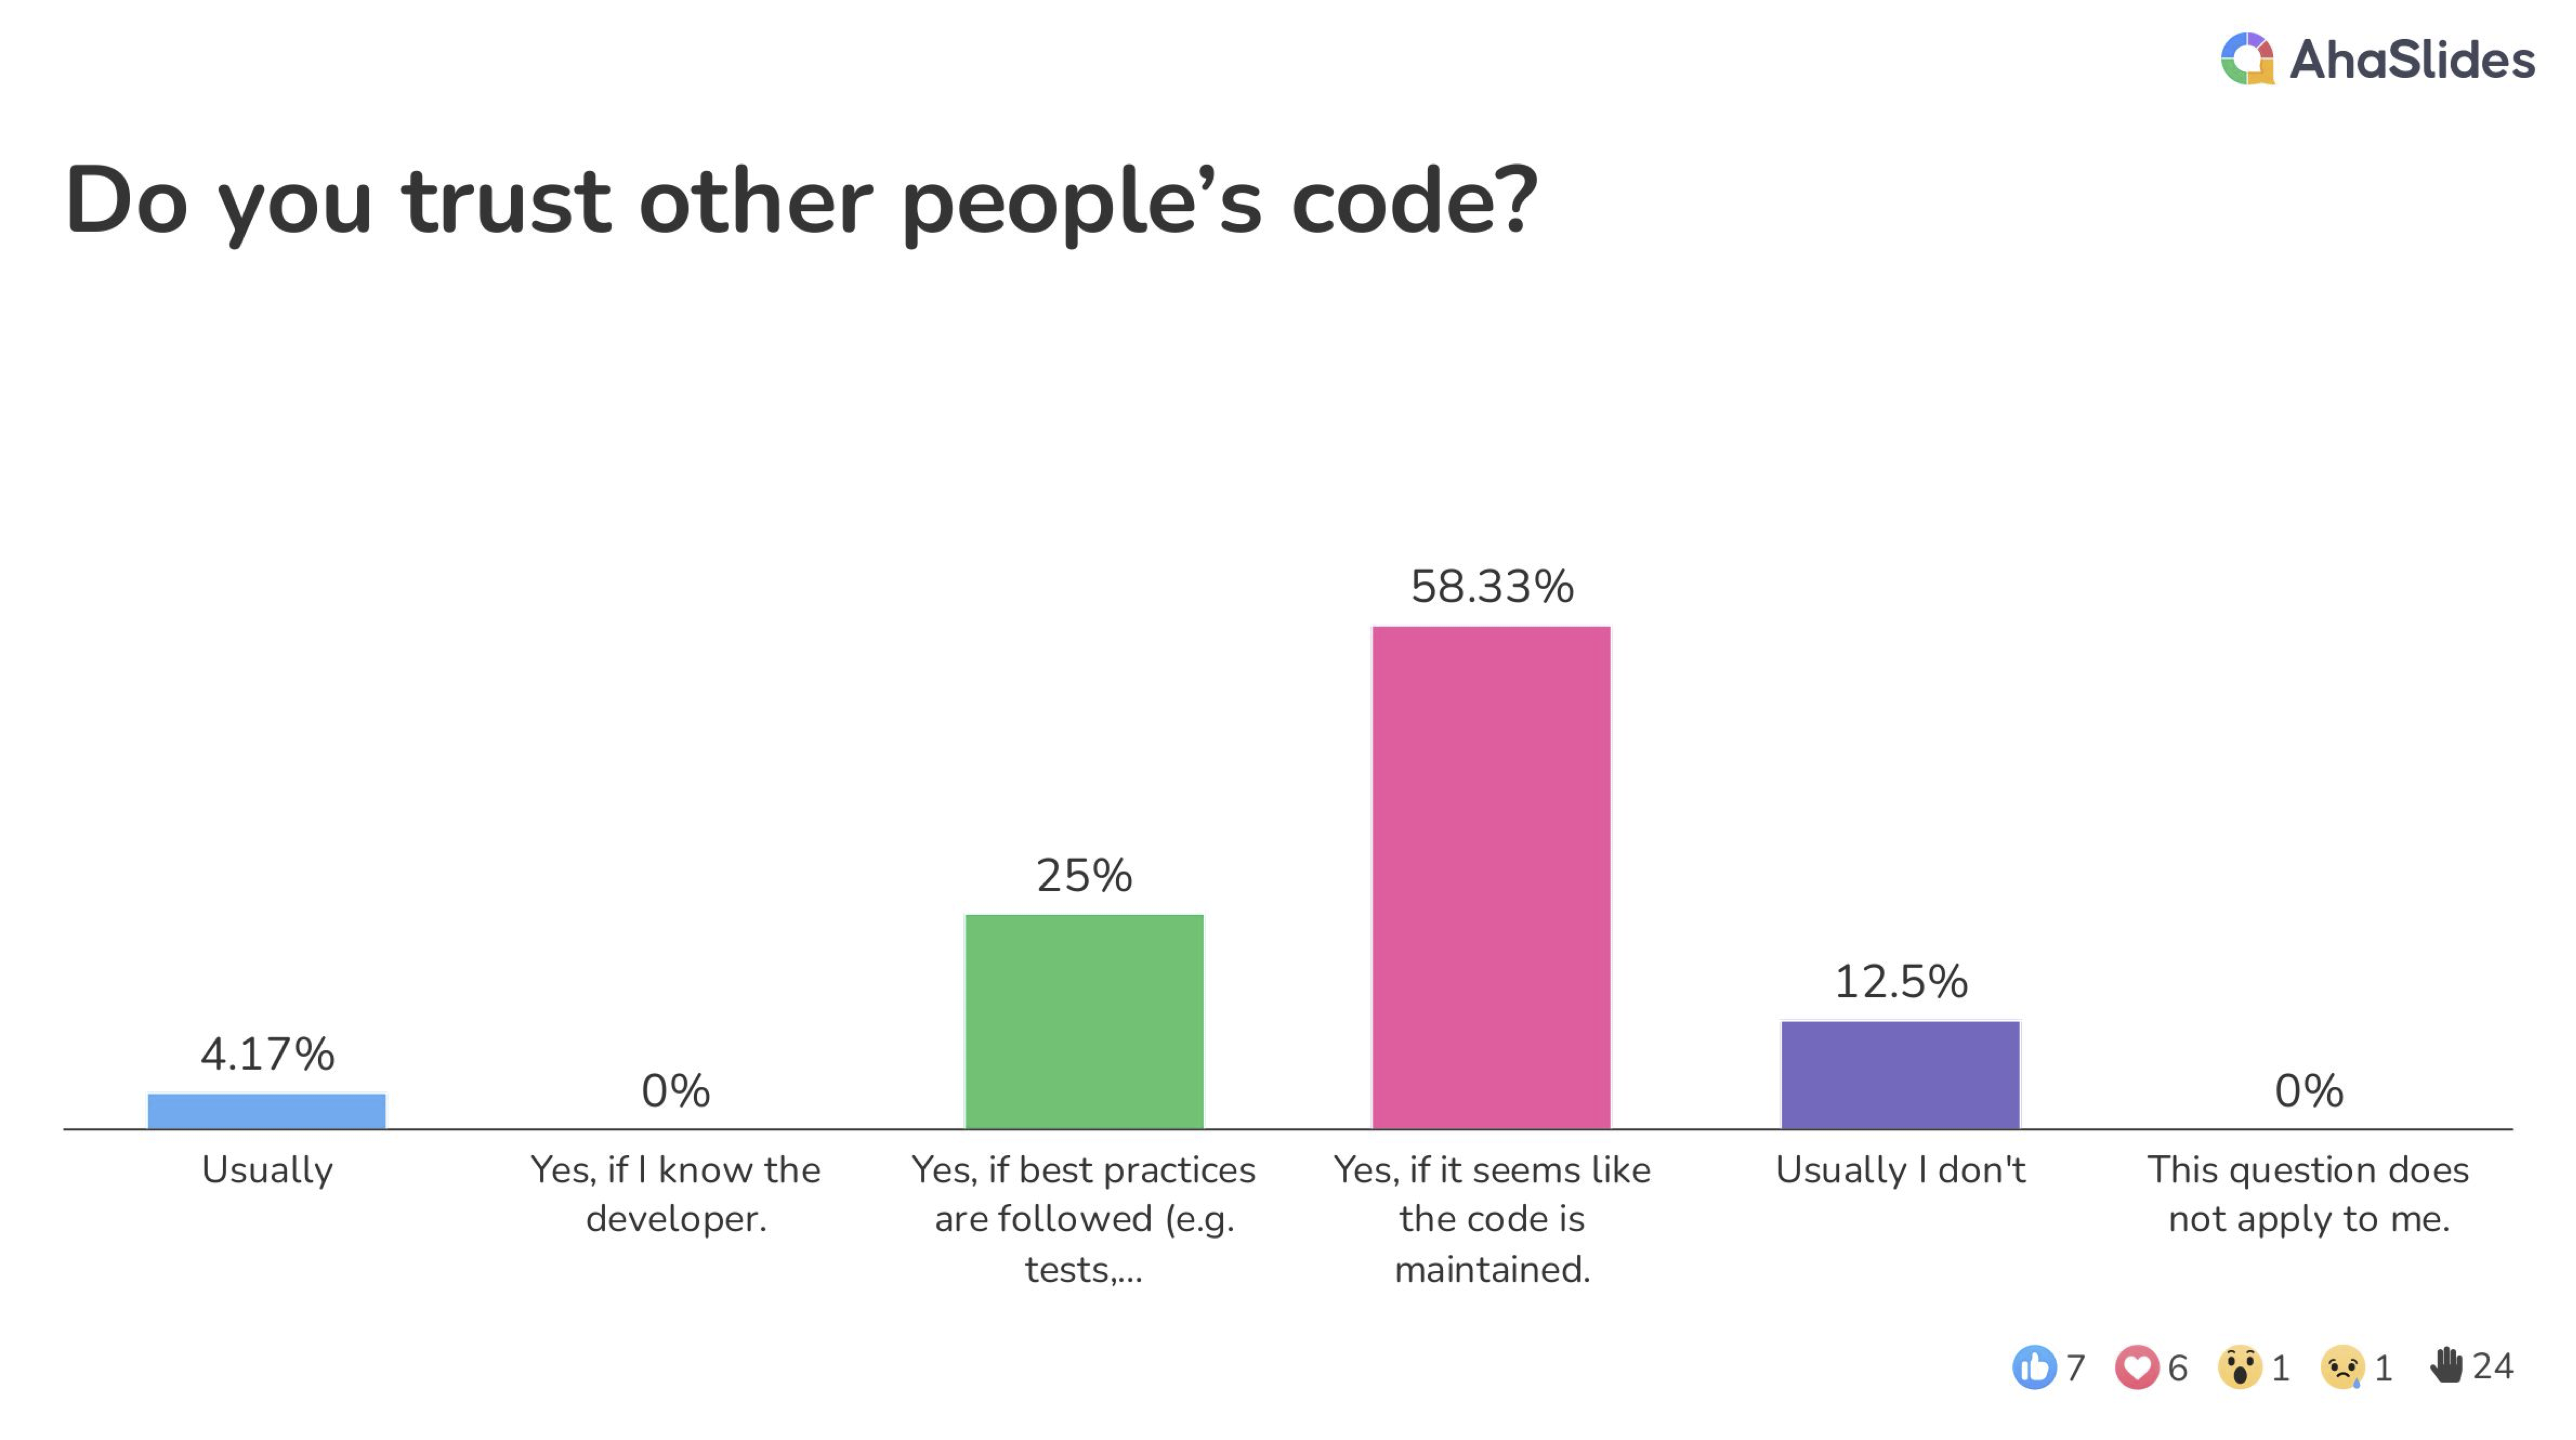 58% if the code seems to be maintained, 25% if best practices are followed, 12% usually I don&amp;rsquo;t, 4% usually I do